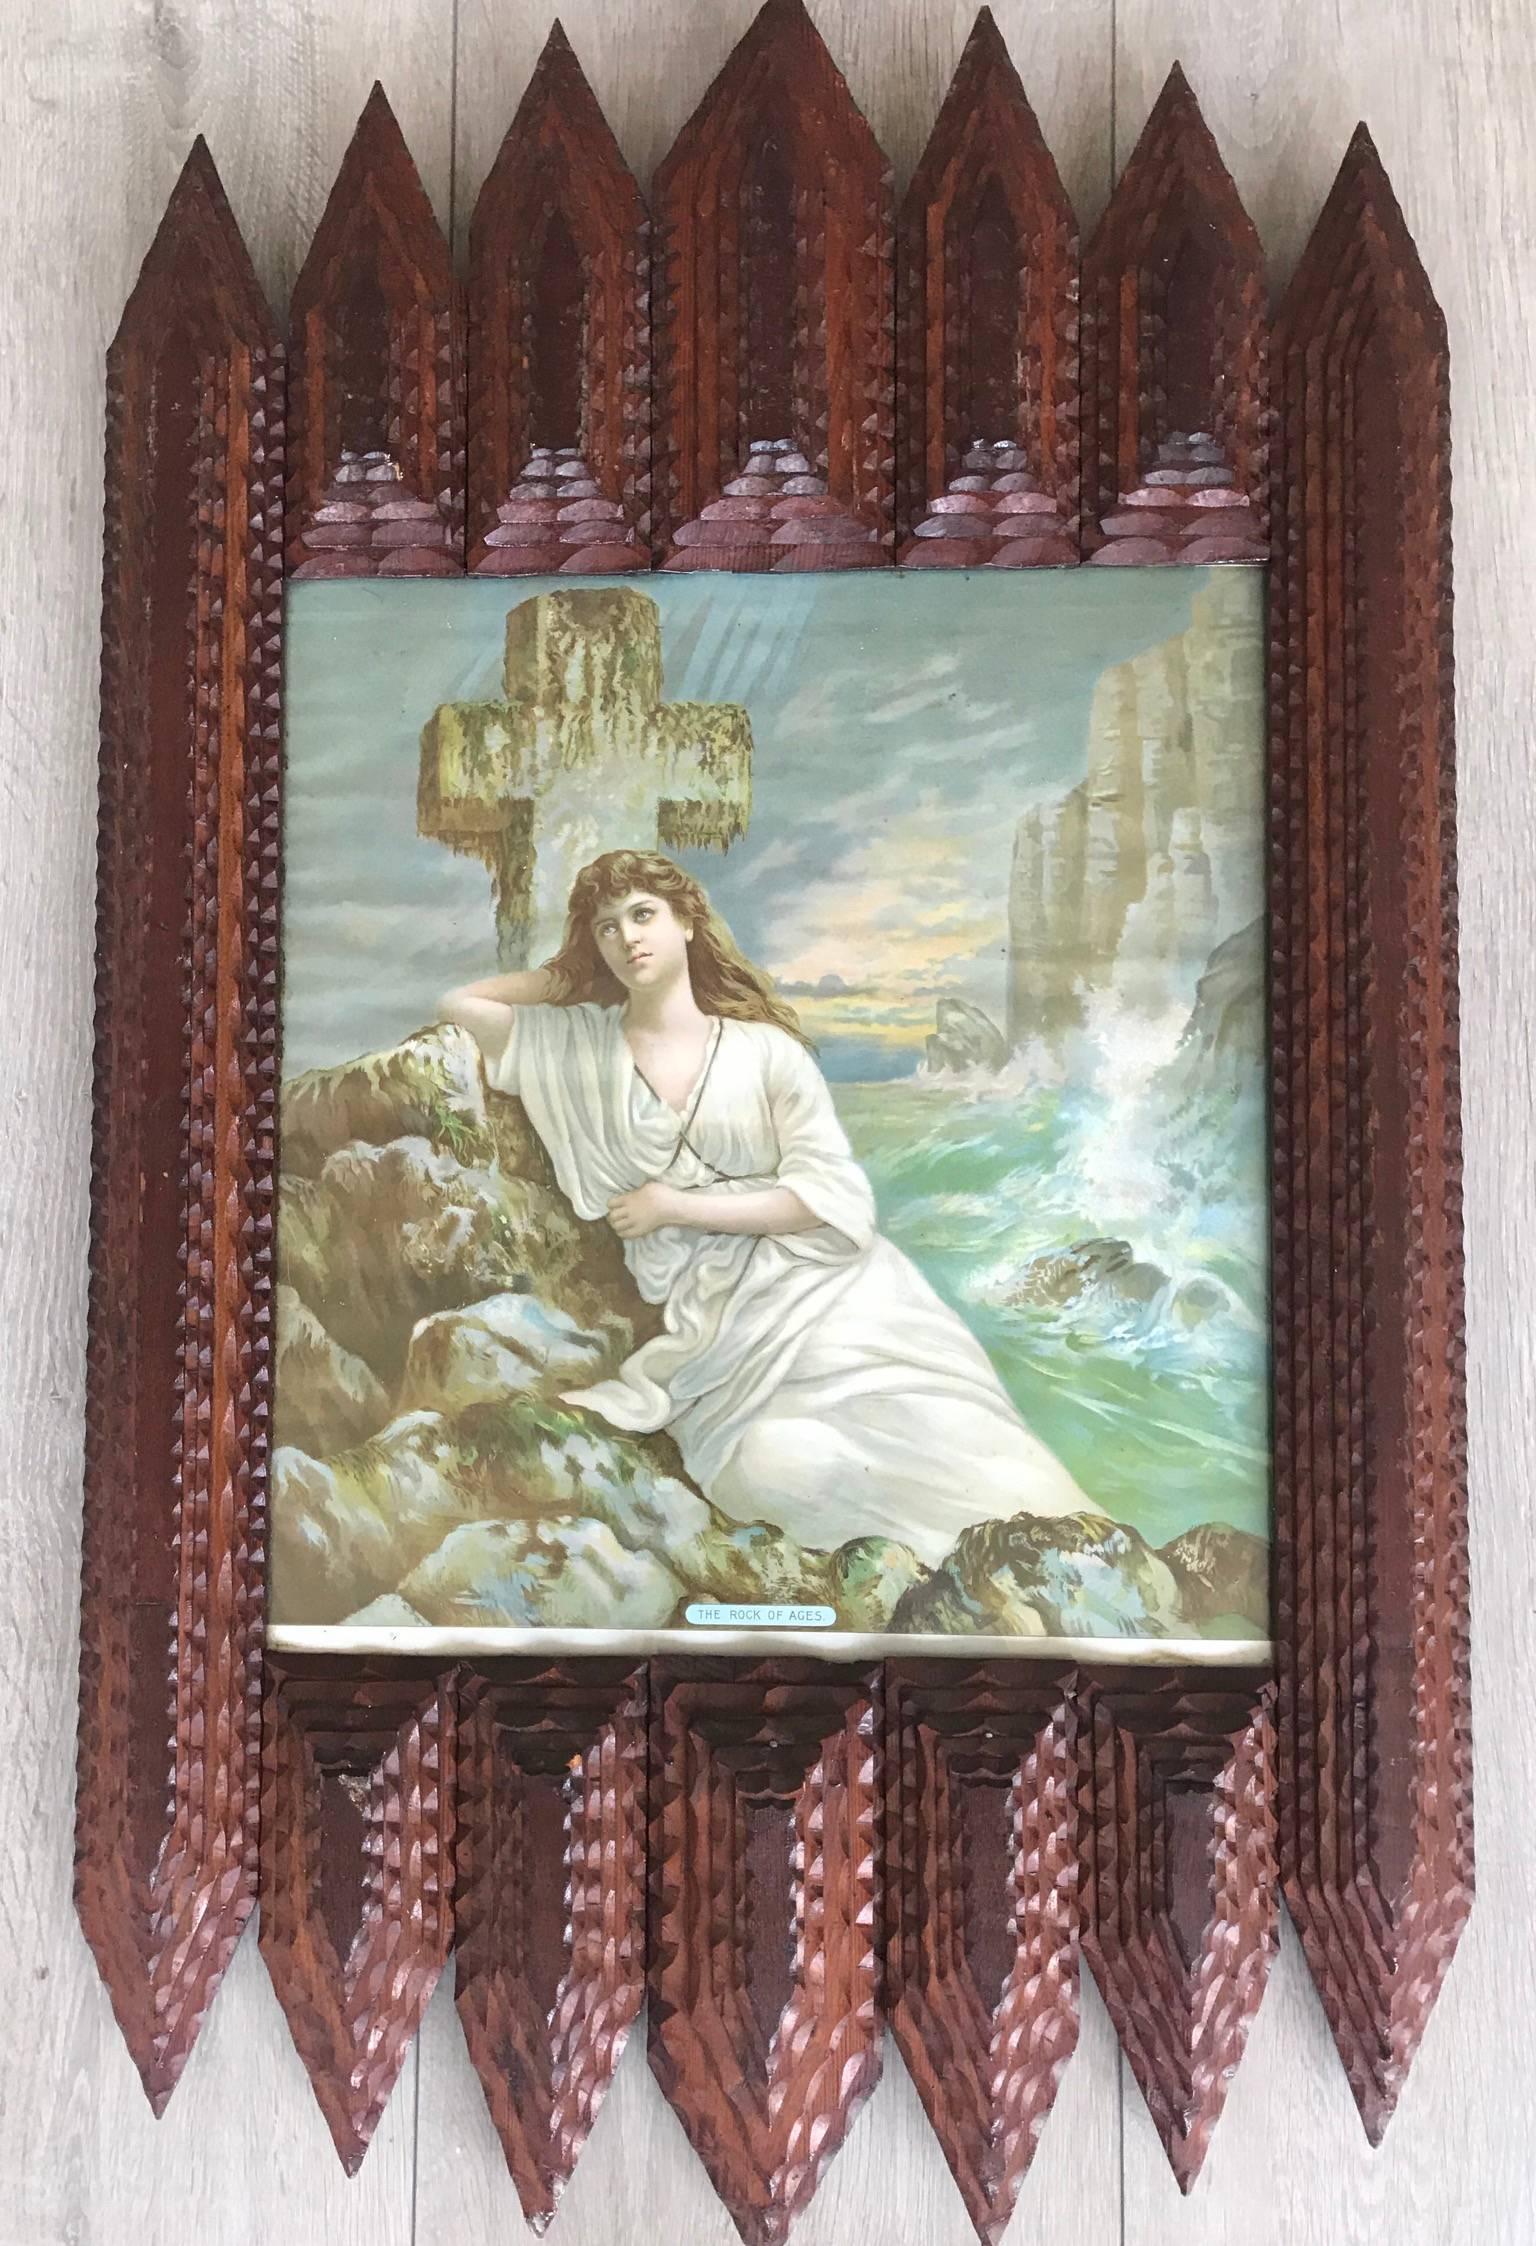 Beautifully crafted picture frame with the original glass panel. 

For the collectors of top quality and sizable Tramp Art home accessories we also have this stunning and one of a kind frame. This finely detailed frame is in perfect condition, it